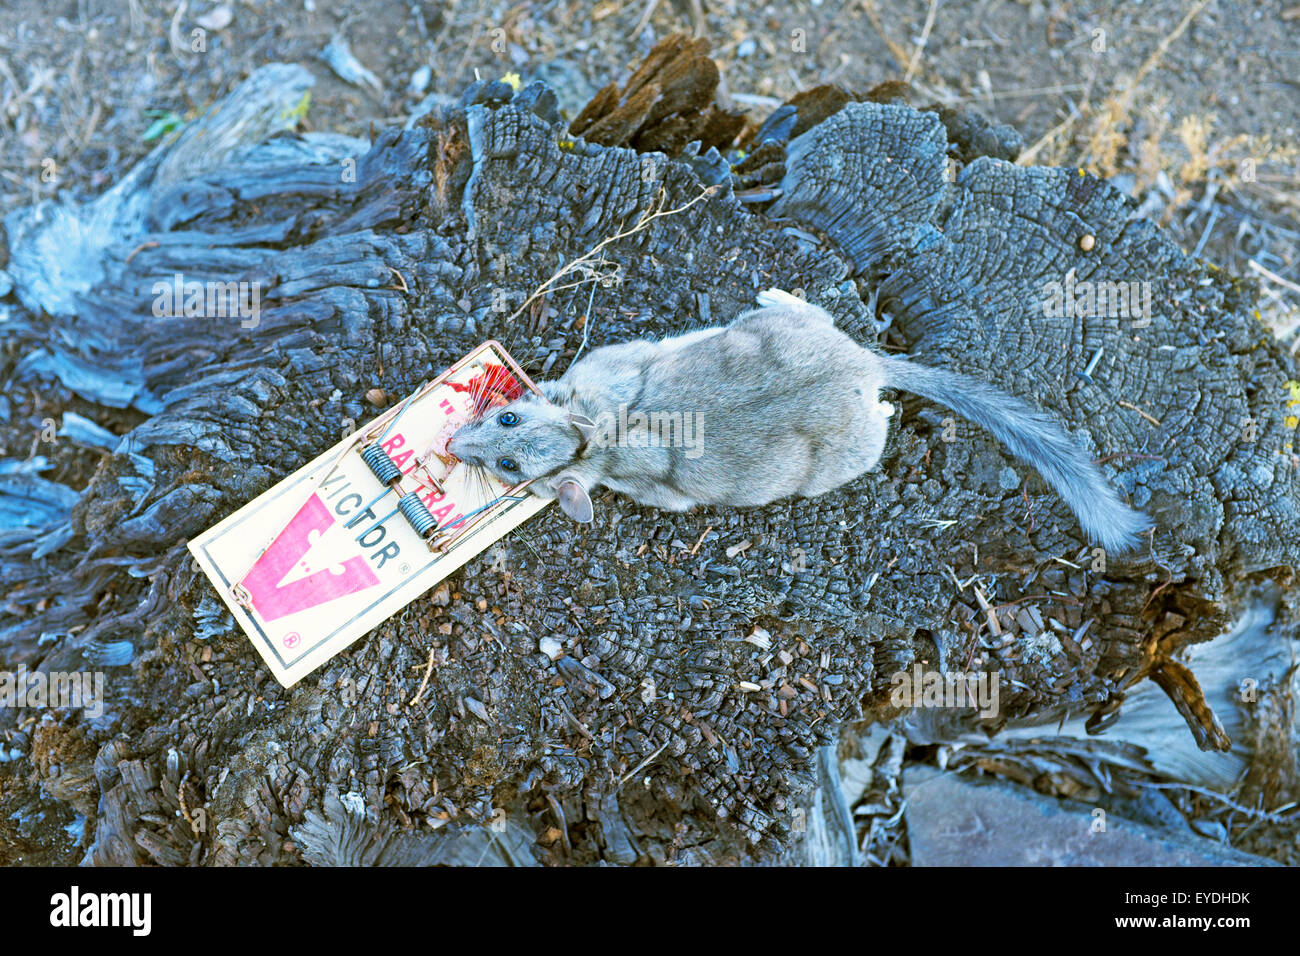 A dead packrat or bushy tailed woodrat caught in a rat trap. Stock Photo